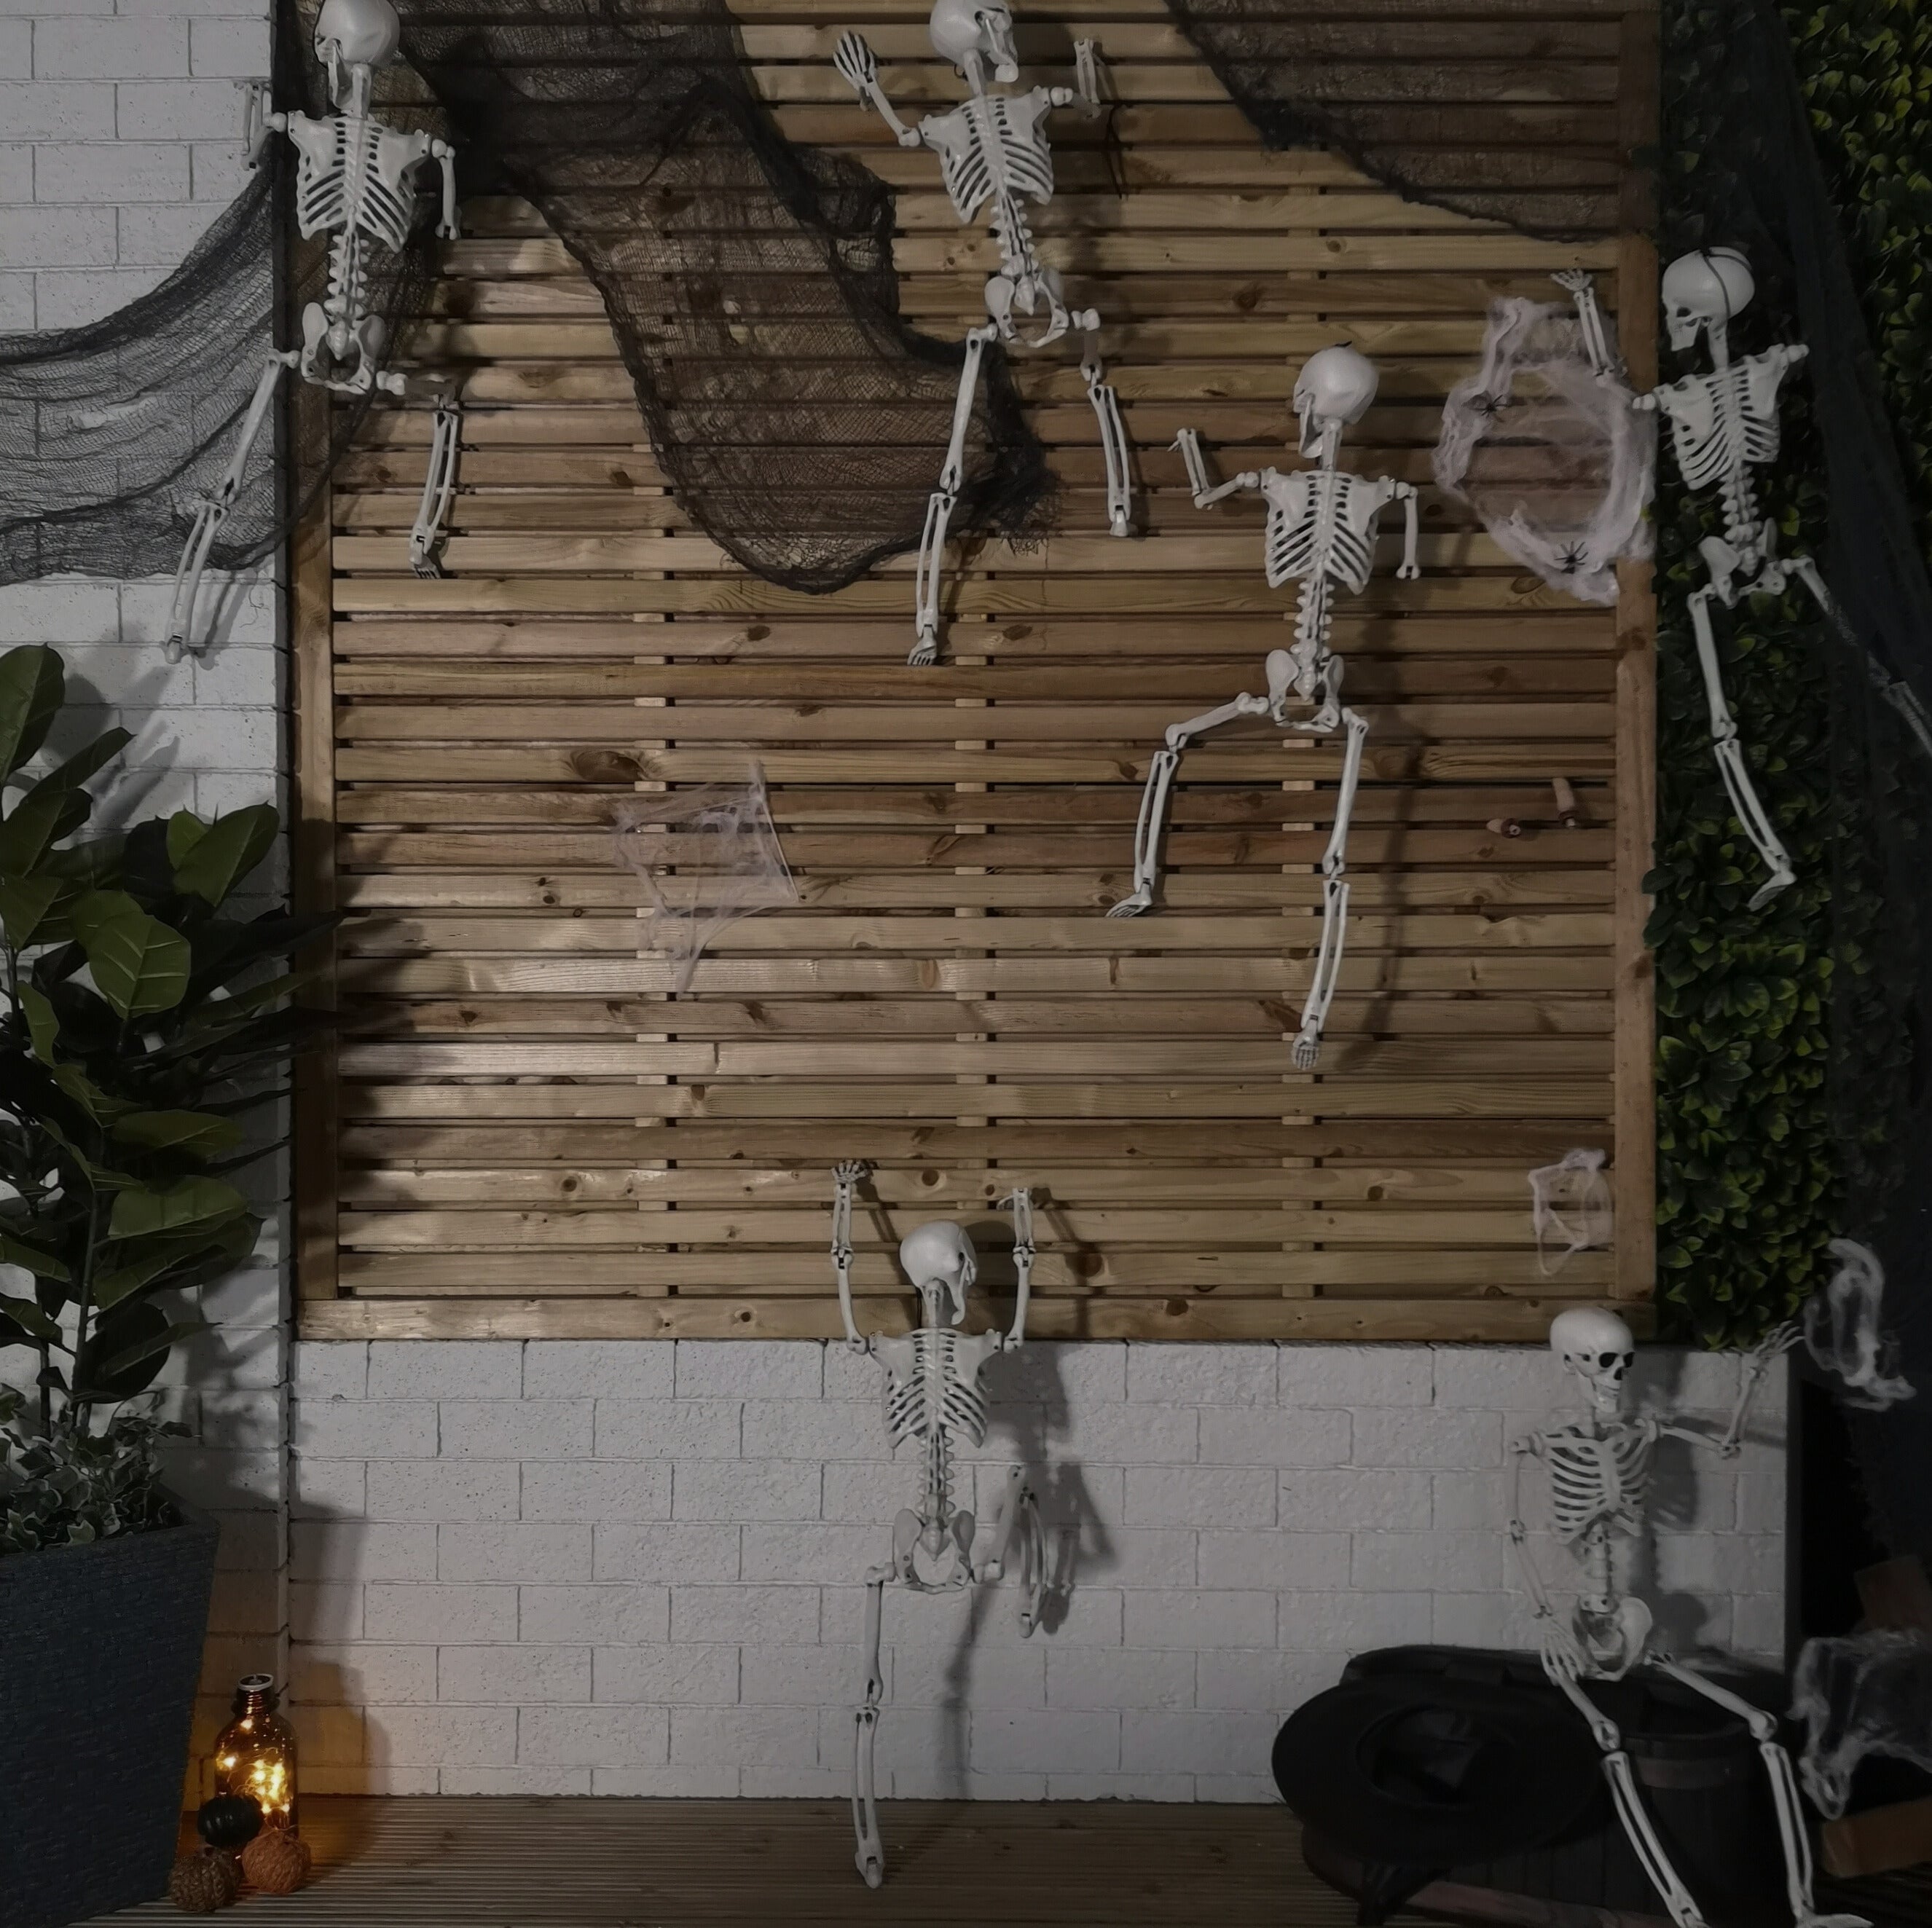 90cm (3ft) Posable Full Body Halloween Skeleton Decoration with Movable Joints